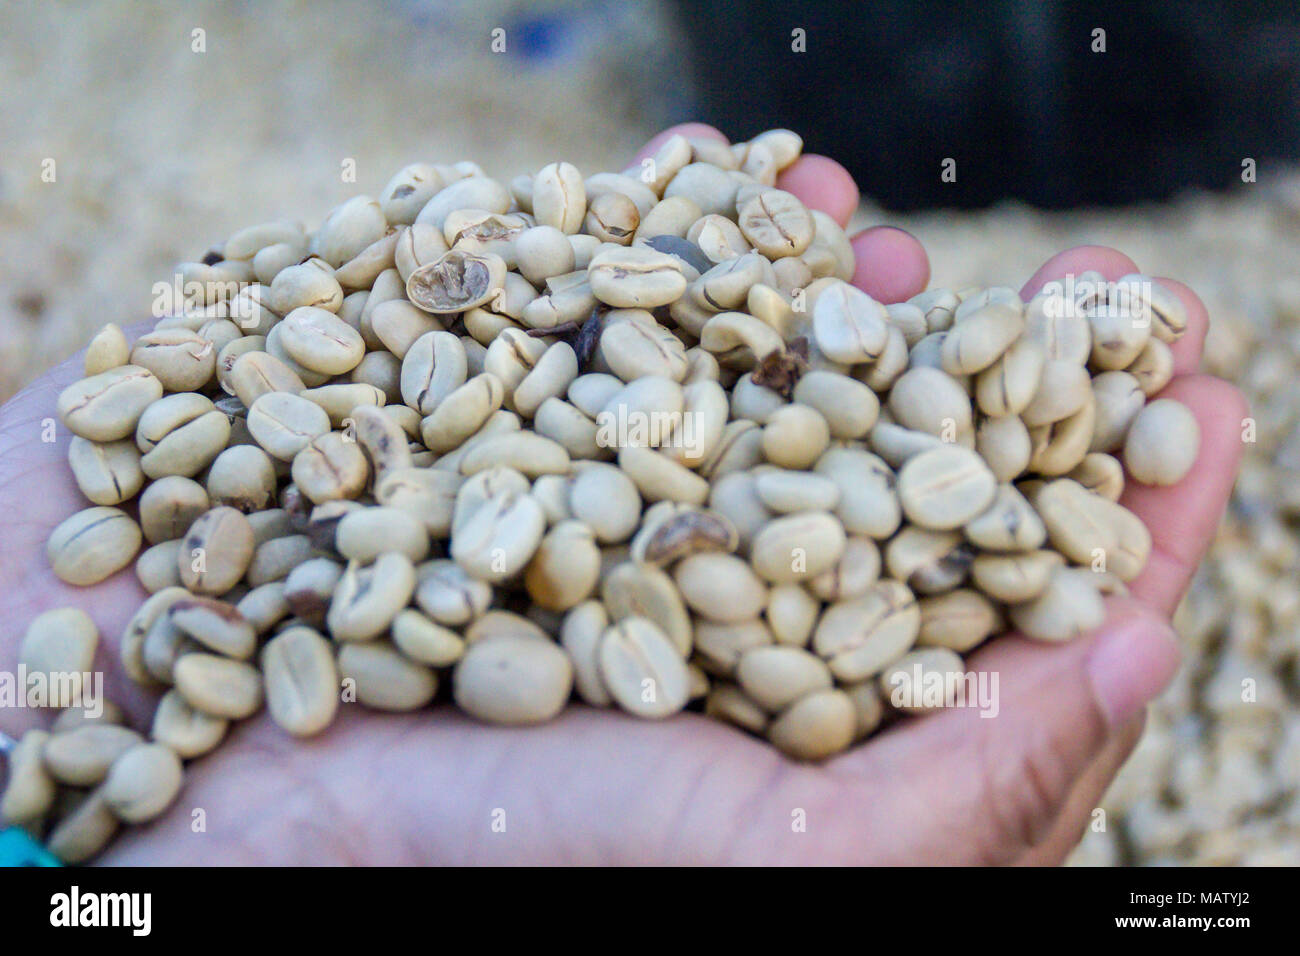 Some Coffee Beans Scattered On Hold Hands. Stock Photo